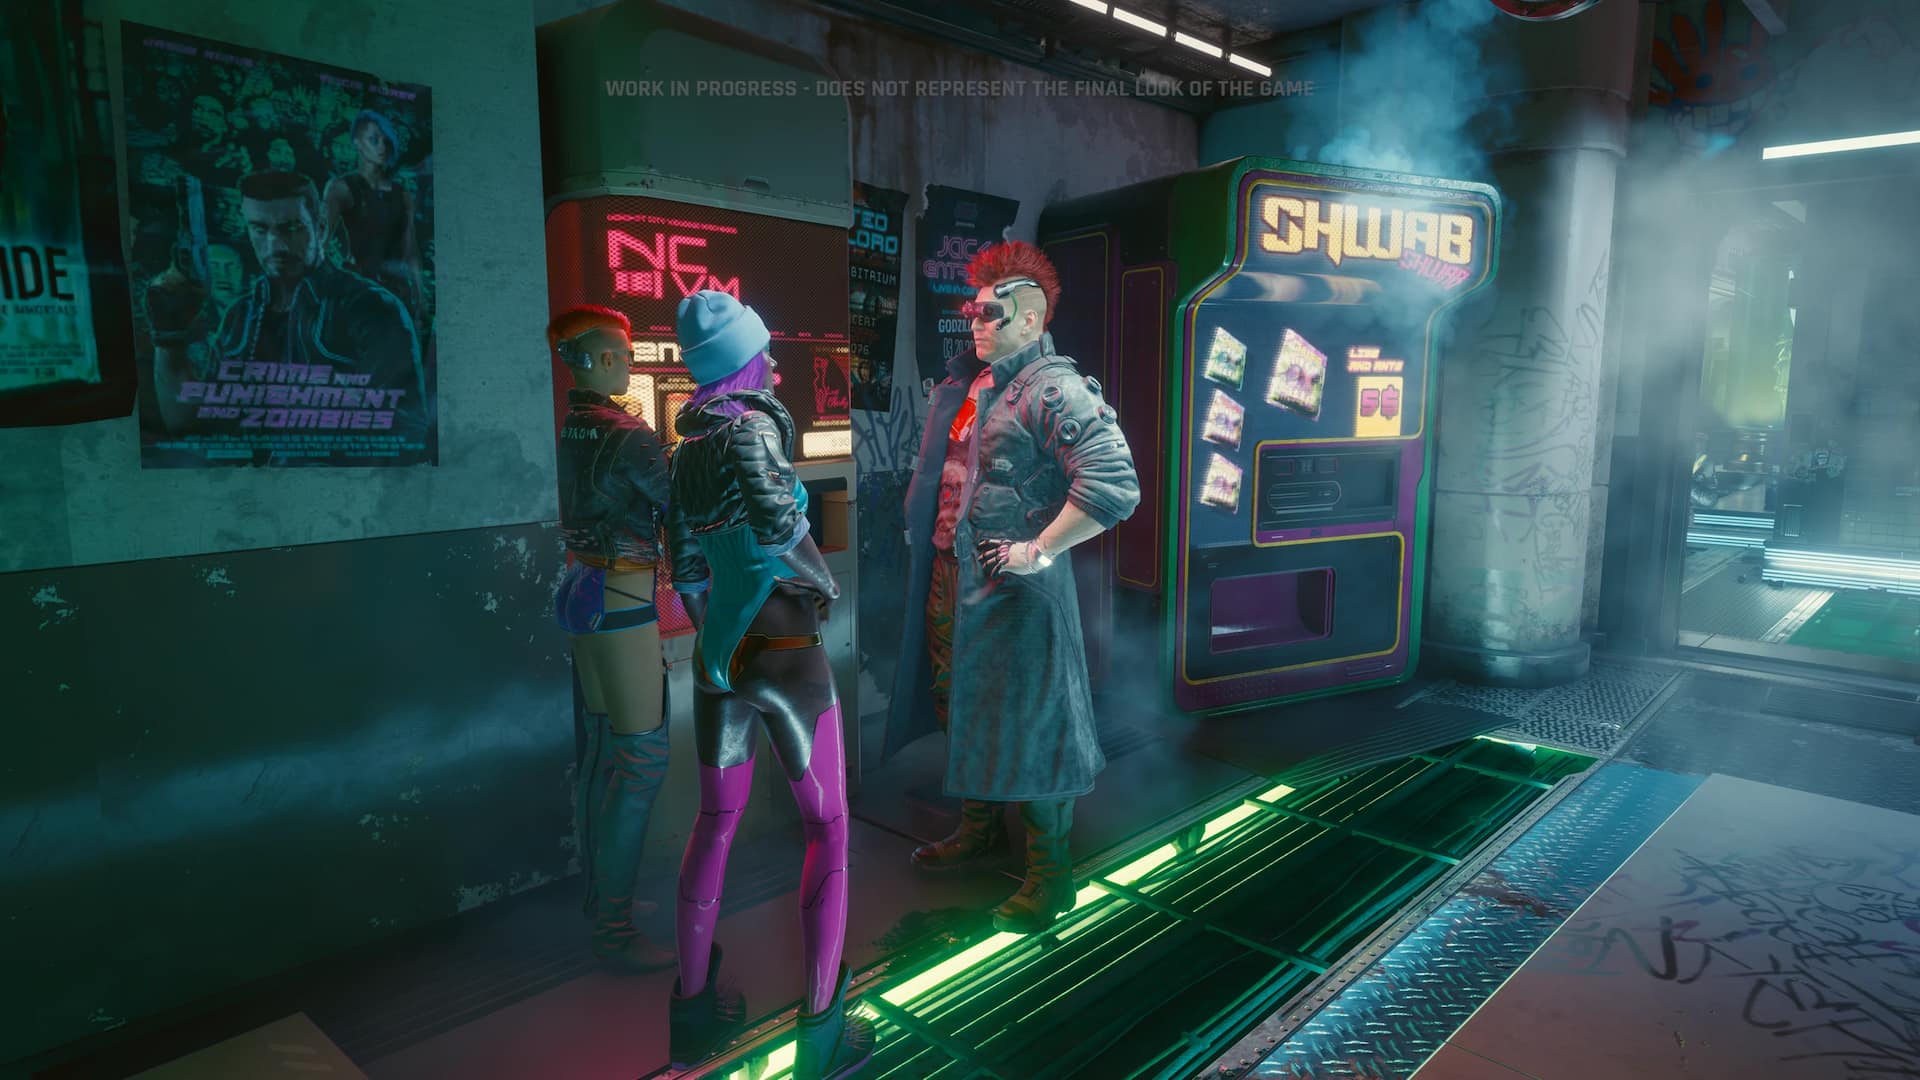 This Cyberpunk 2077 Mod restores 100 NPCs that were cut from the game